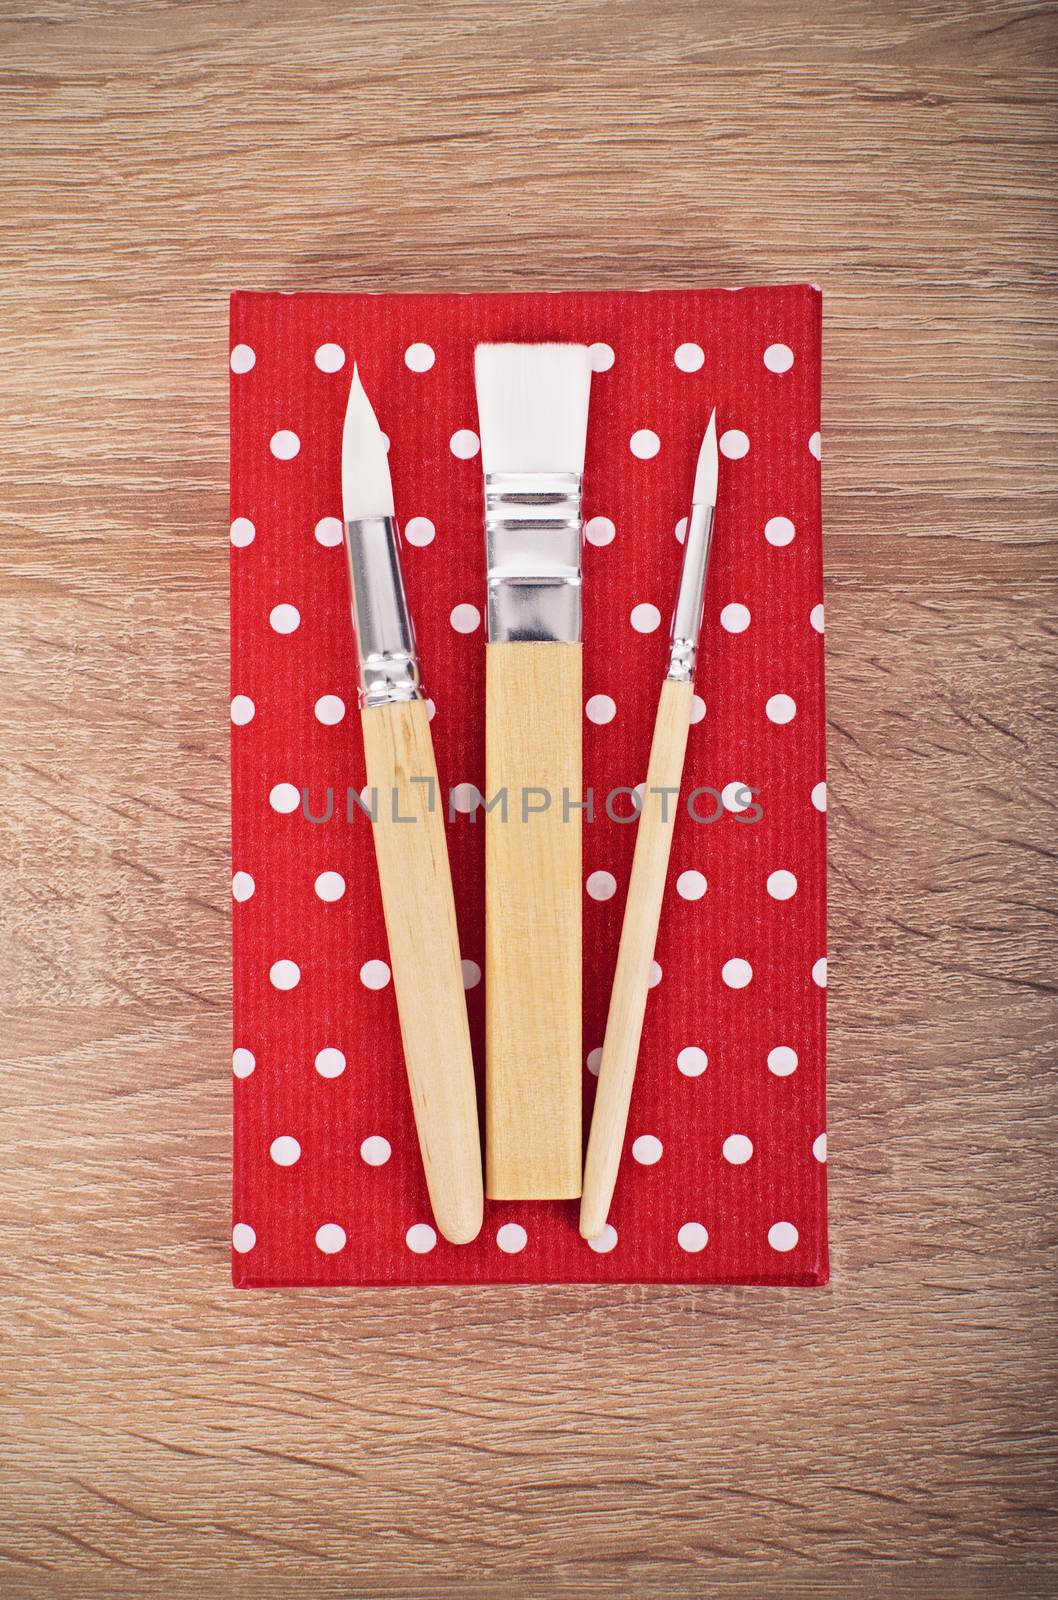 Painting concept. Paintbrushes in different size laid out on a red polka dot box placed on a wooden table.